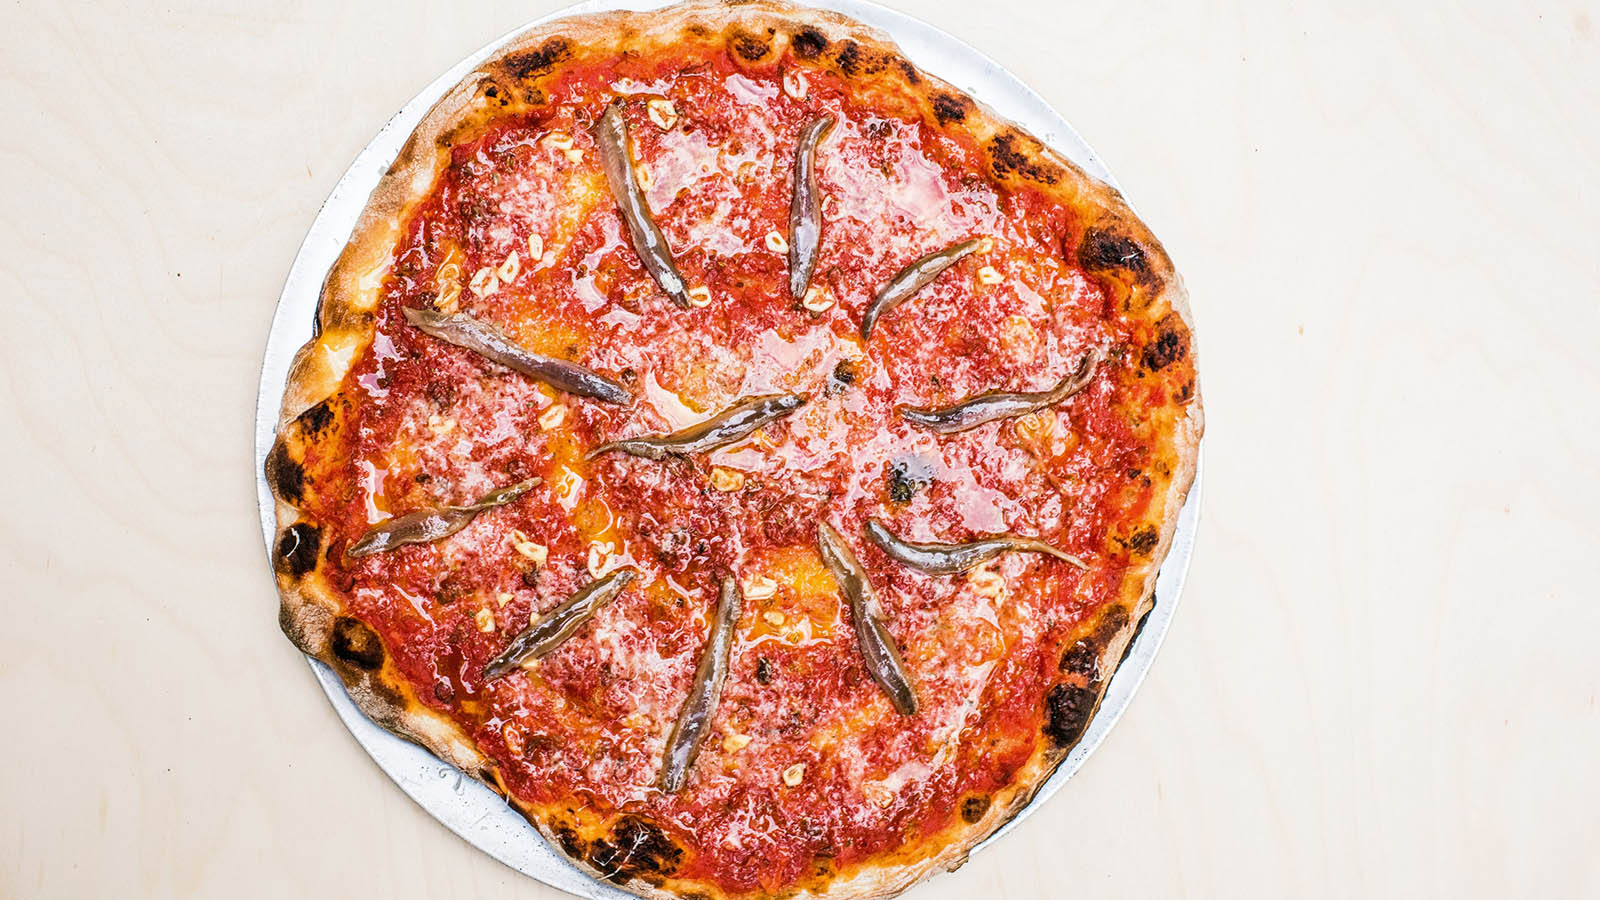 🍆 Vote “Yay” Or “Nay” On These Polarizing Foods, And We’ll Reveal a Truth About You Anchovy Pizza